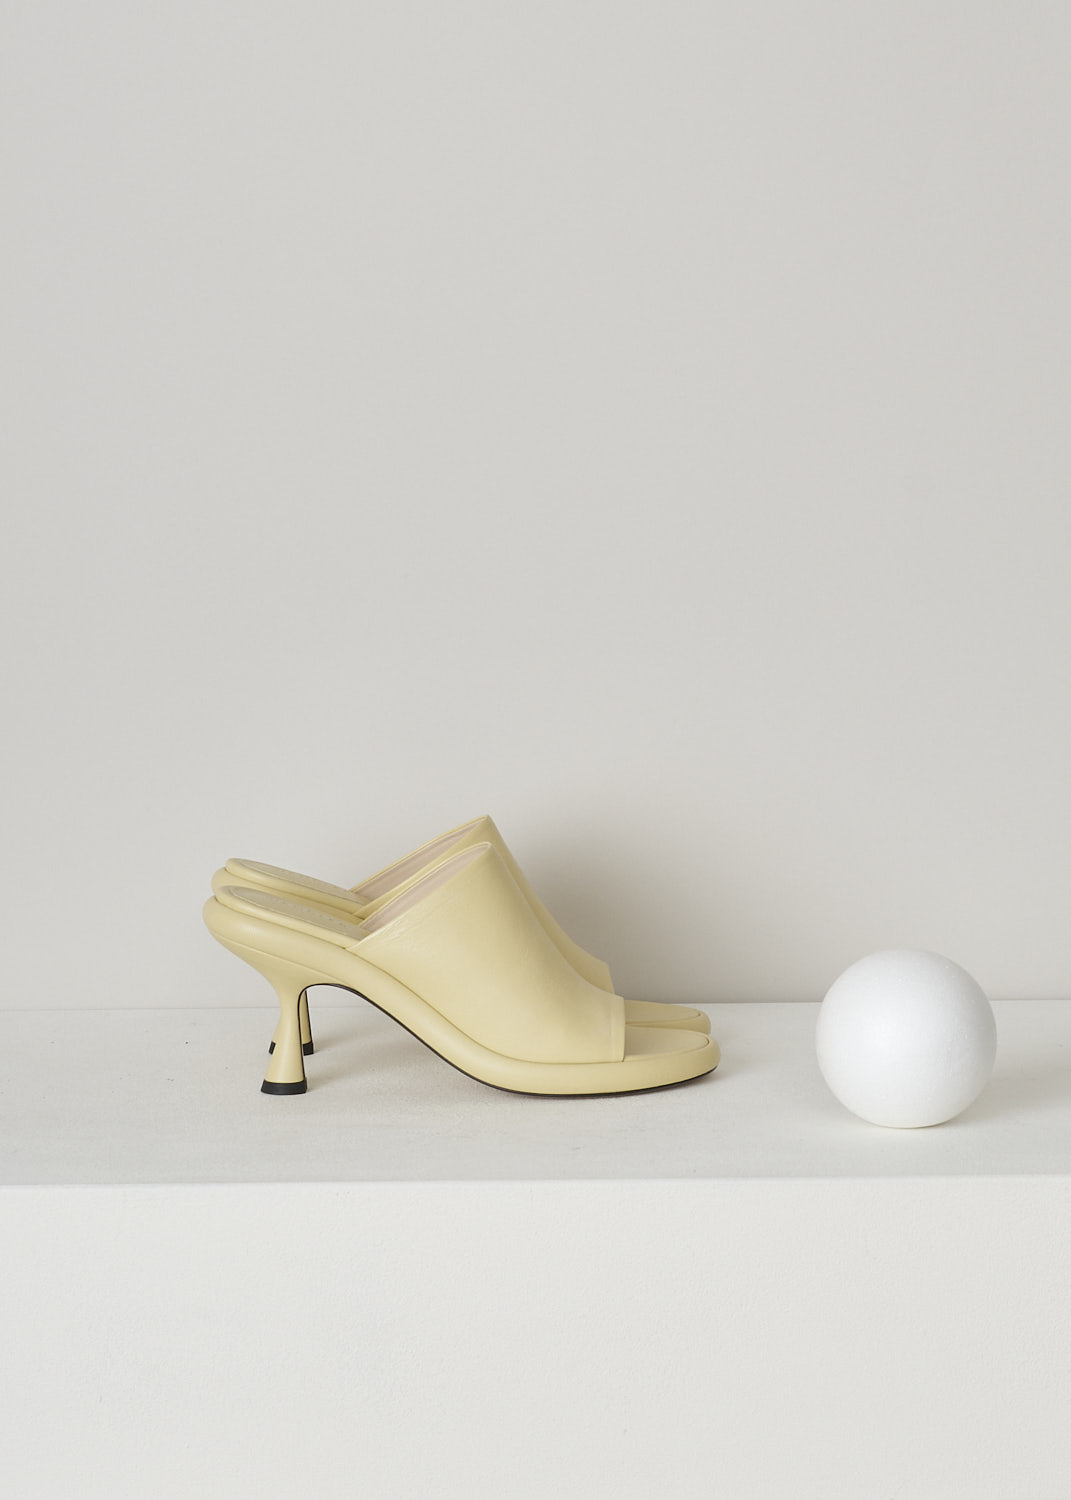 WANDLER, JUNE PLATFORM PUMP IN CANDLE, 22208_871201_1435, Yellow, Side, These pale yellow heeled slip-on mules have a broad strap across the vamp, a rounded open-toe and a platform sole. The slip-on mules have a mid-height spool heel.
